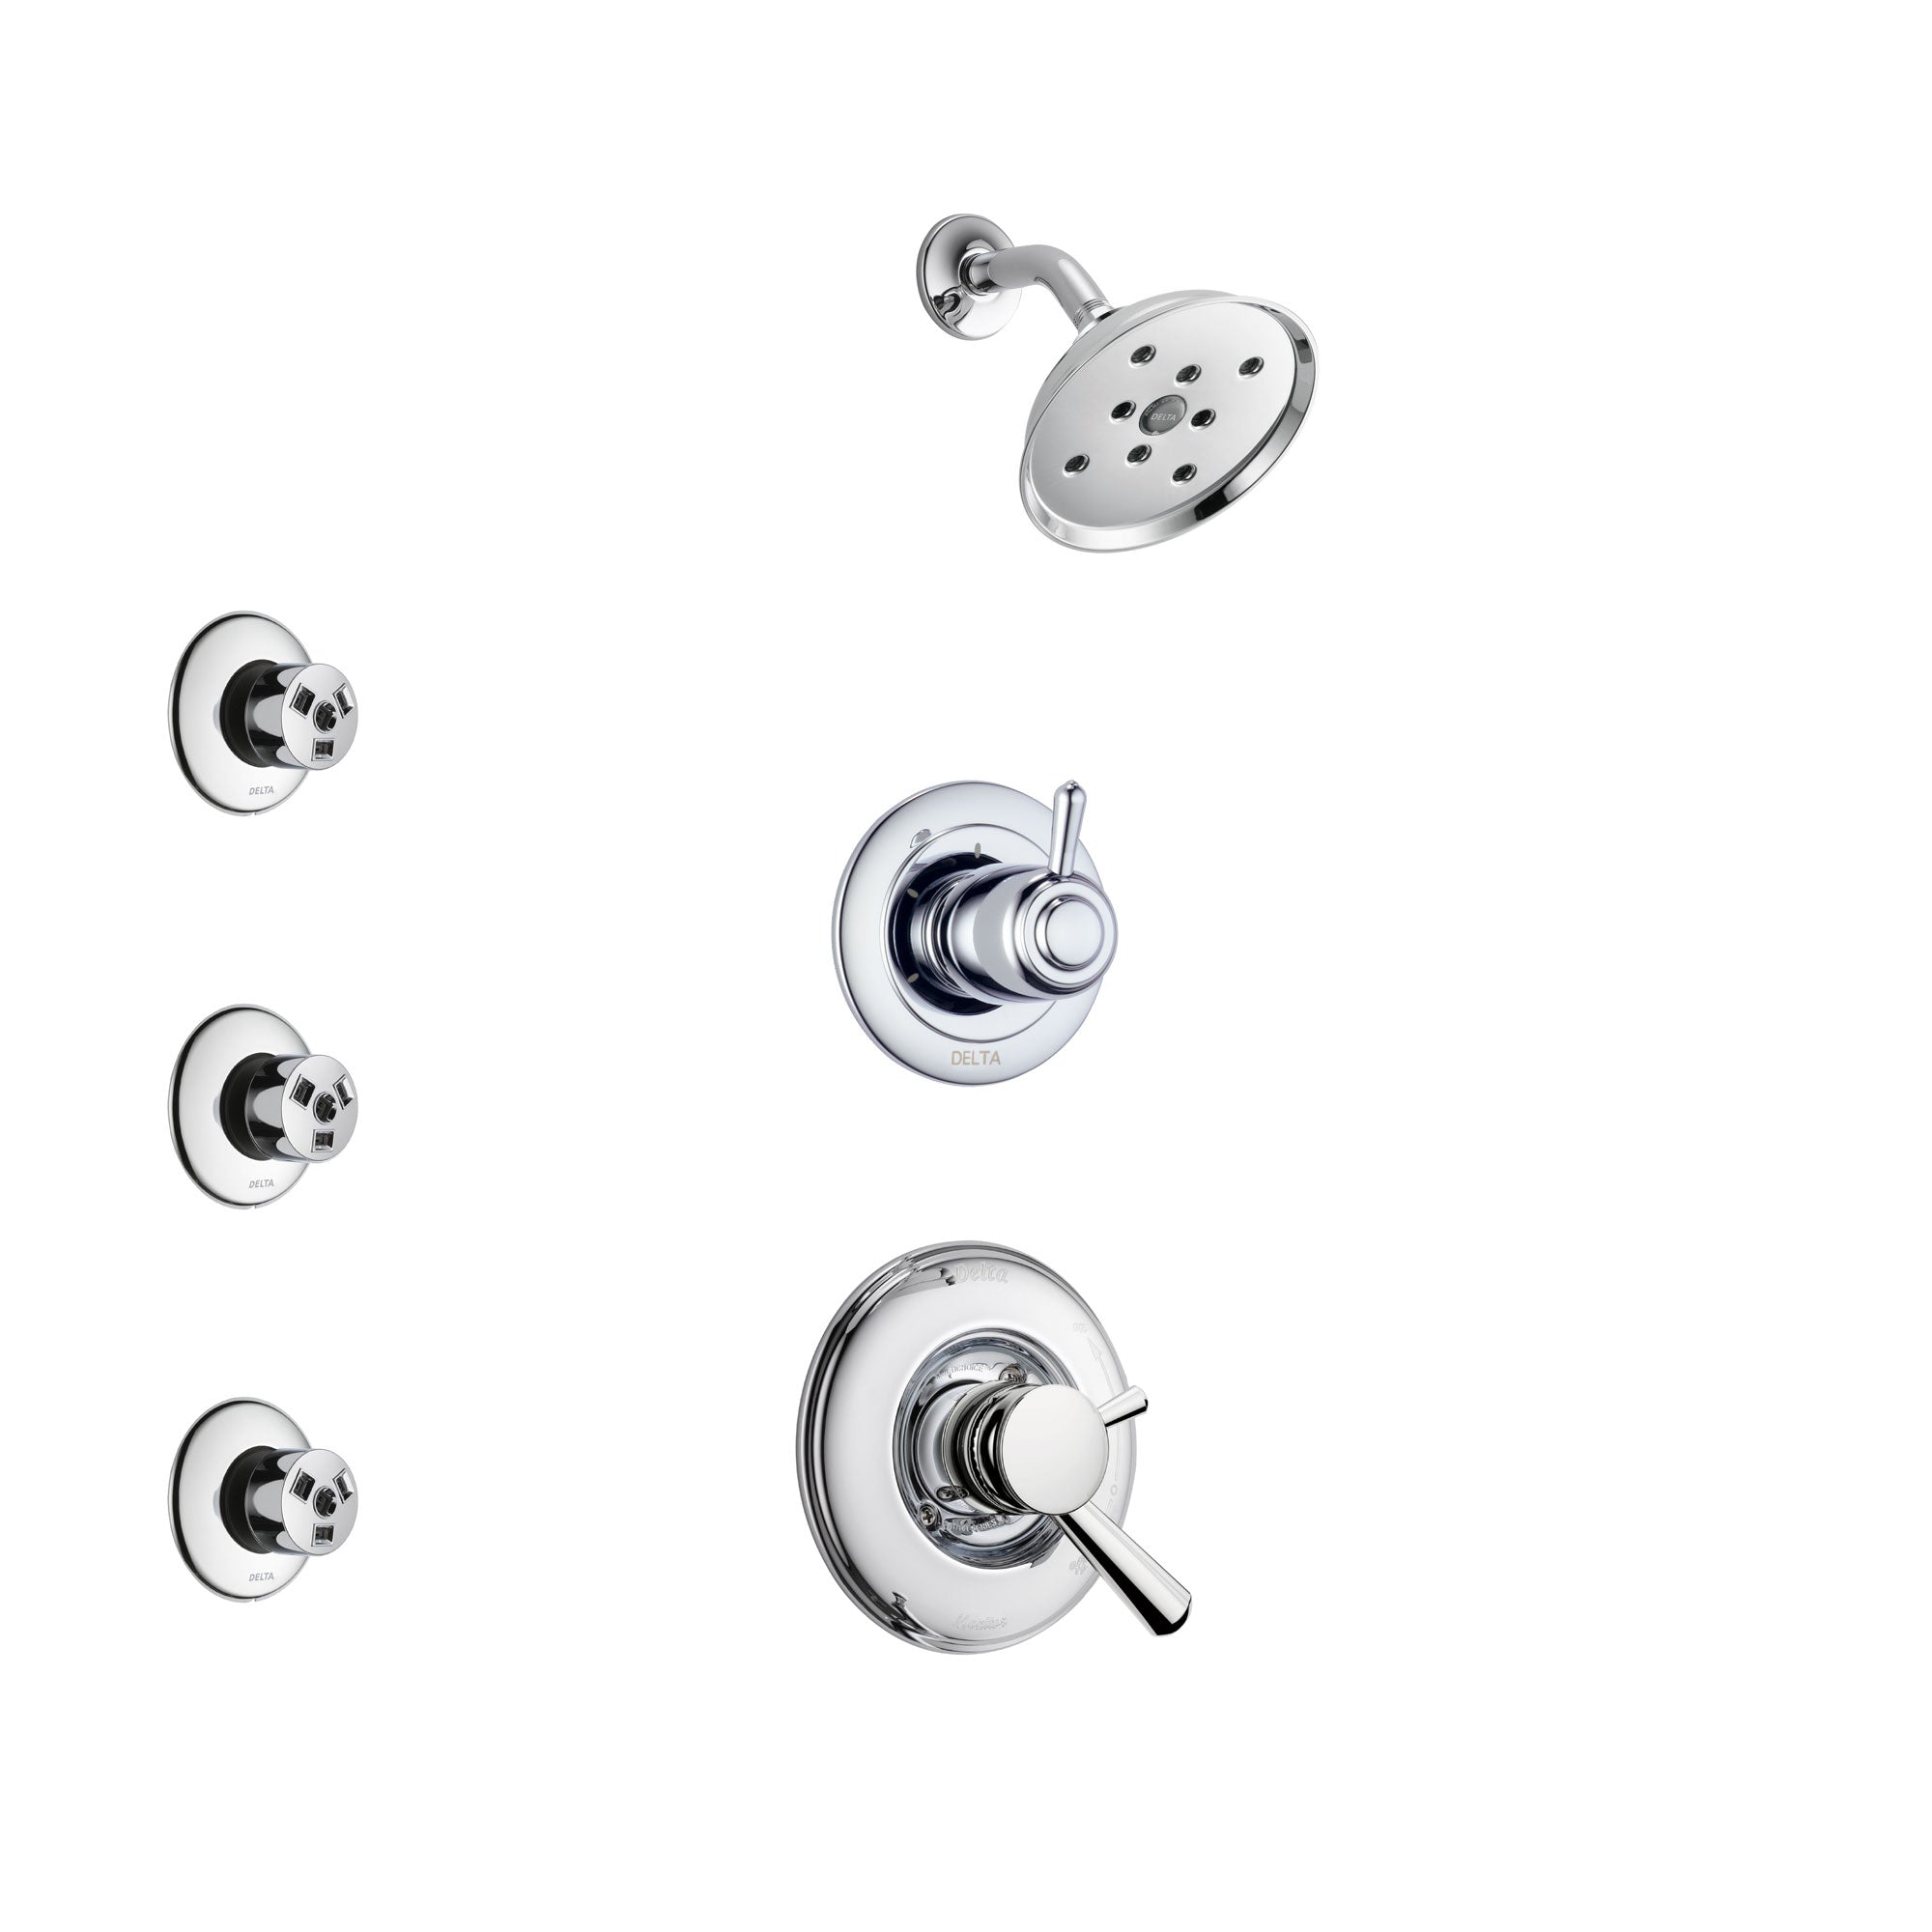 Delta Linden Chrome Finish Shower System with Dual Control Handle, 3-Setting Diverter, Showerhead, and 3 Body Sprays SS172932